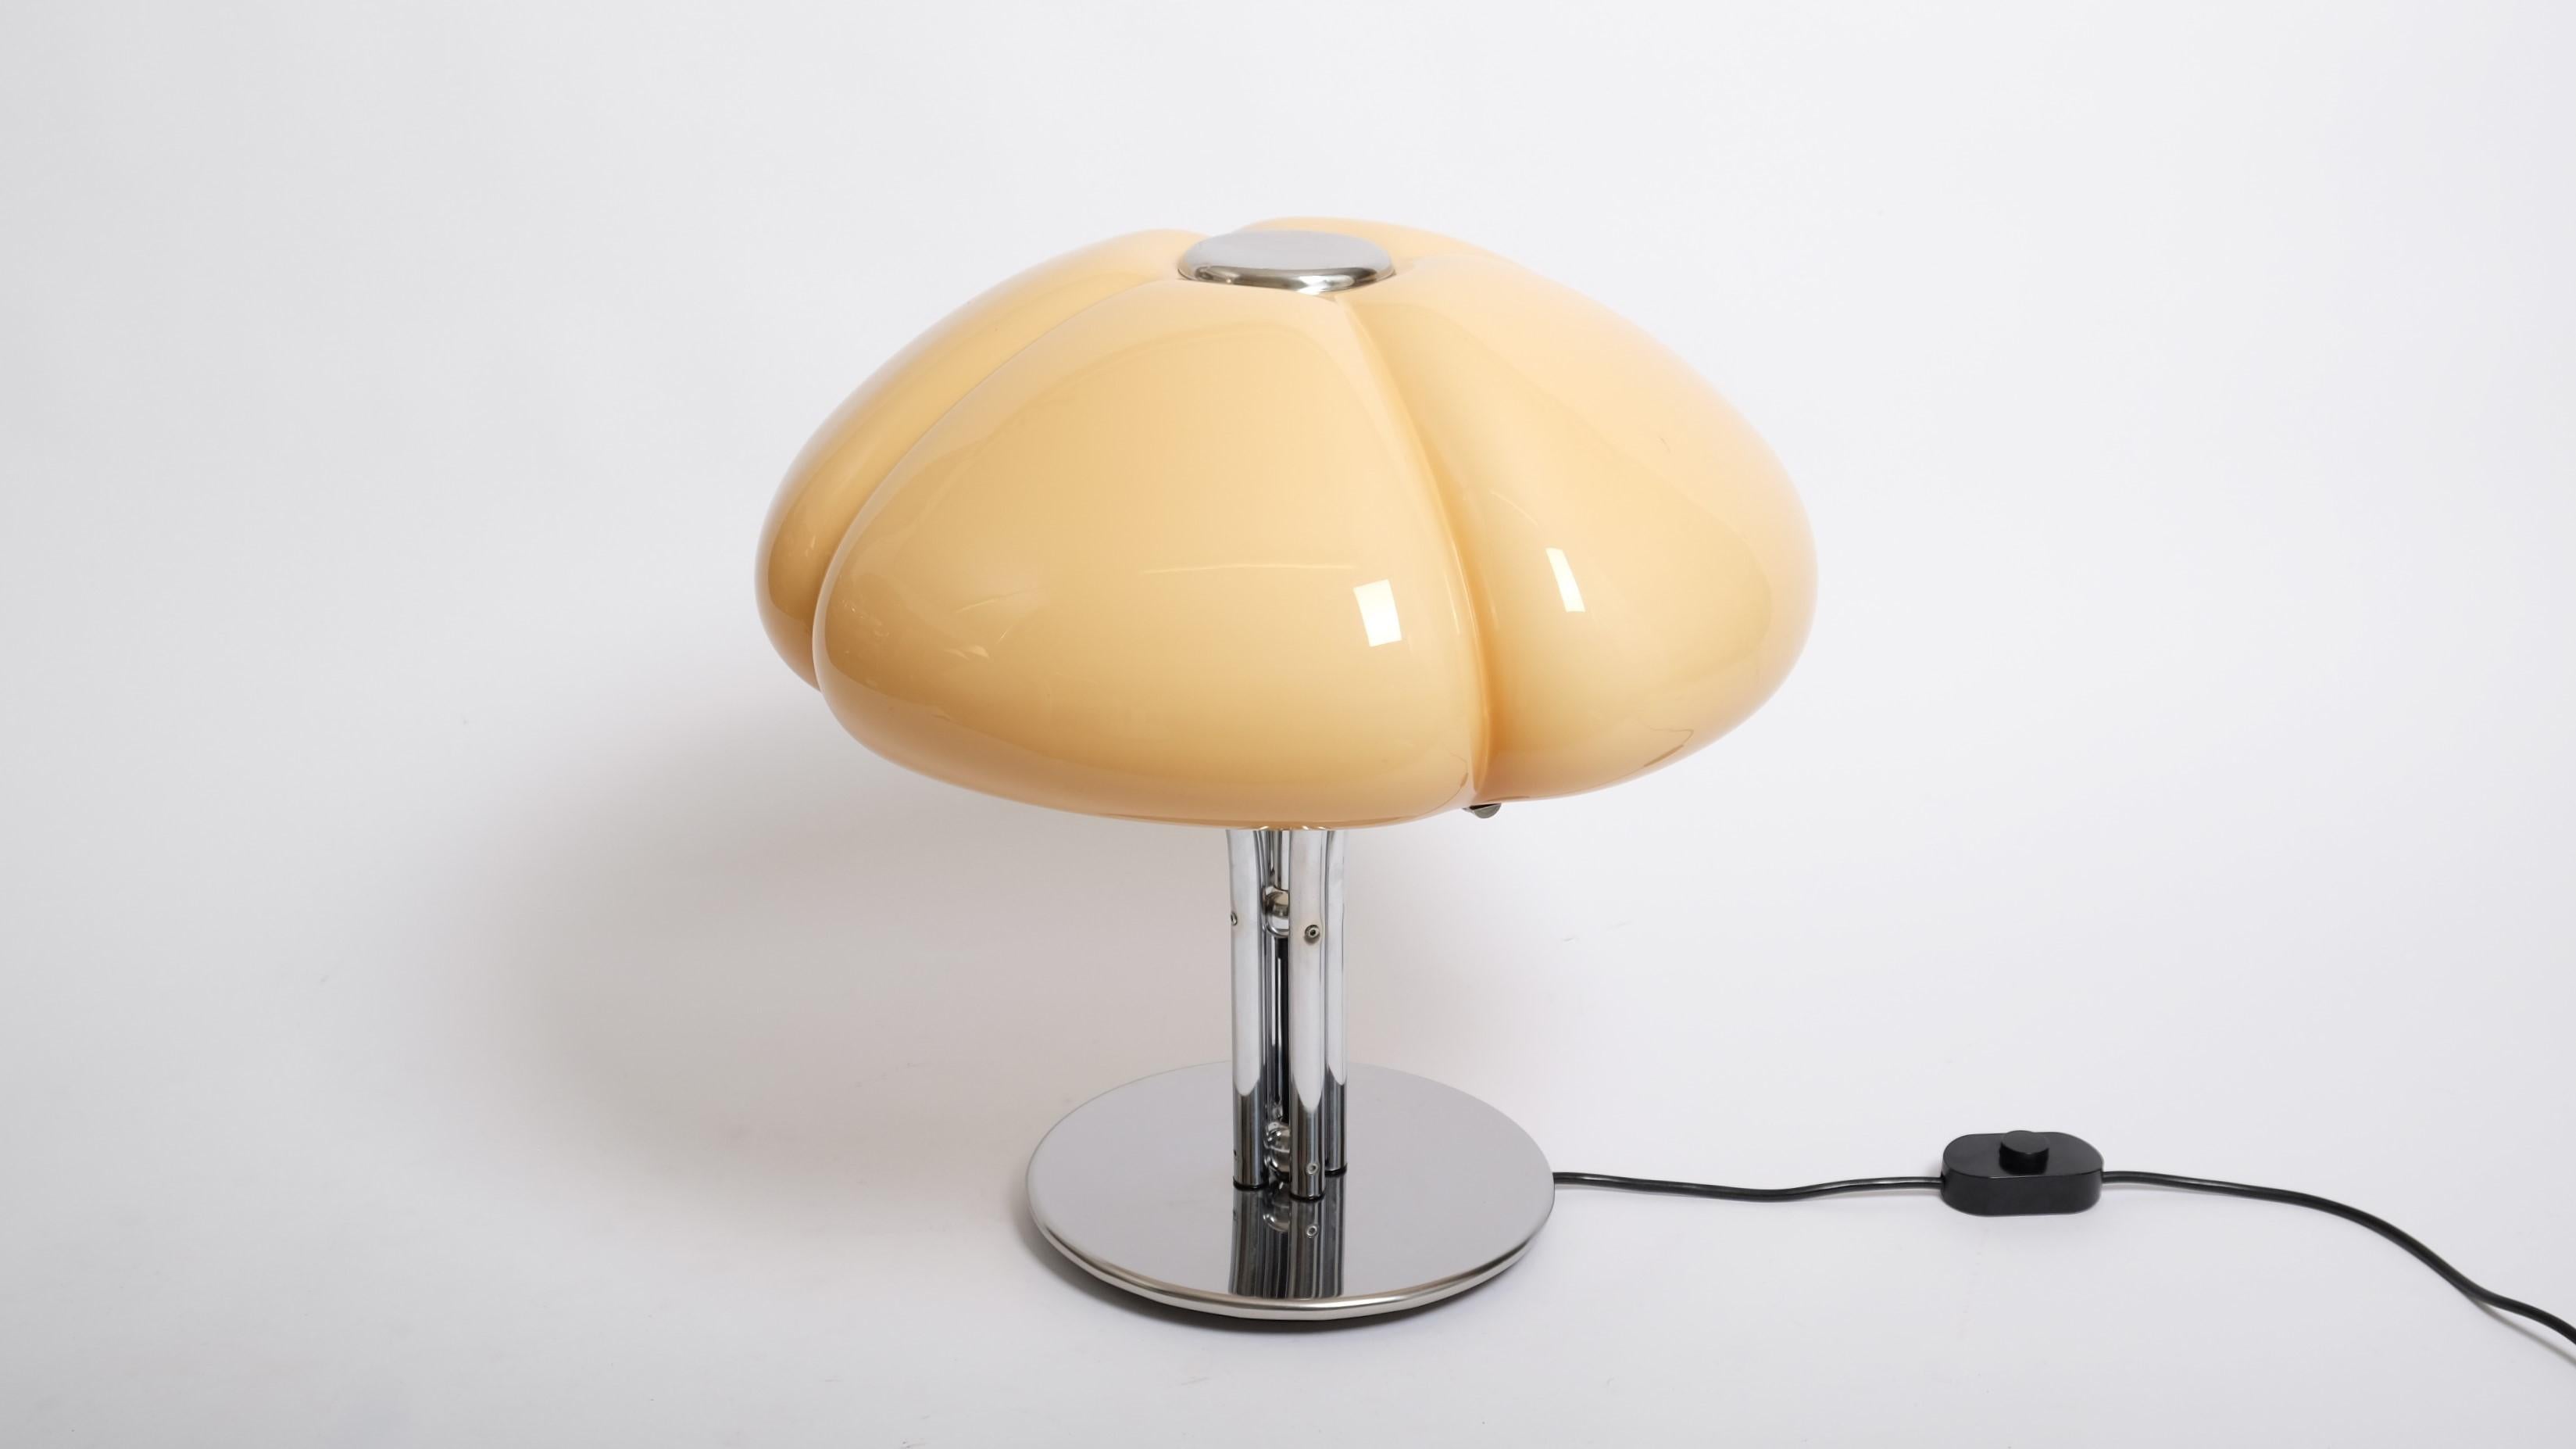 Iconic table lamp from the sixties, model ‘Quadrifoglio’. Designed by Gae Aulenti for Harvey Guzzini, Italy 1960s. Made of a chrome structure holding a biomorphic, soft looking plastic shade. With original Harvey Luce sticker.

The piece is in a